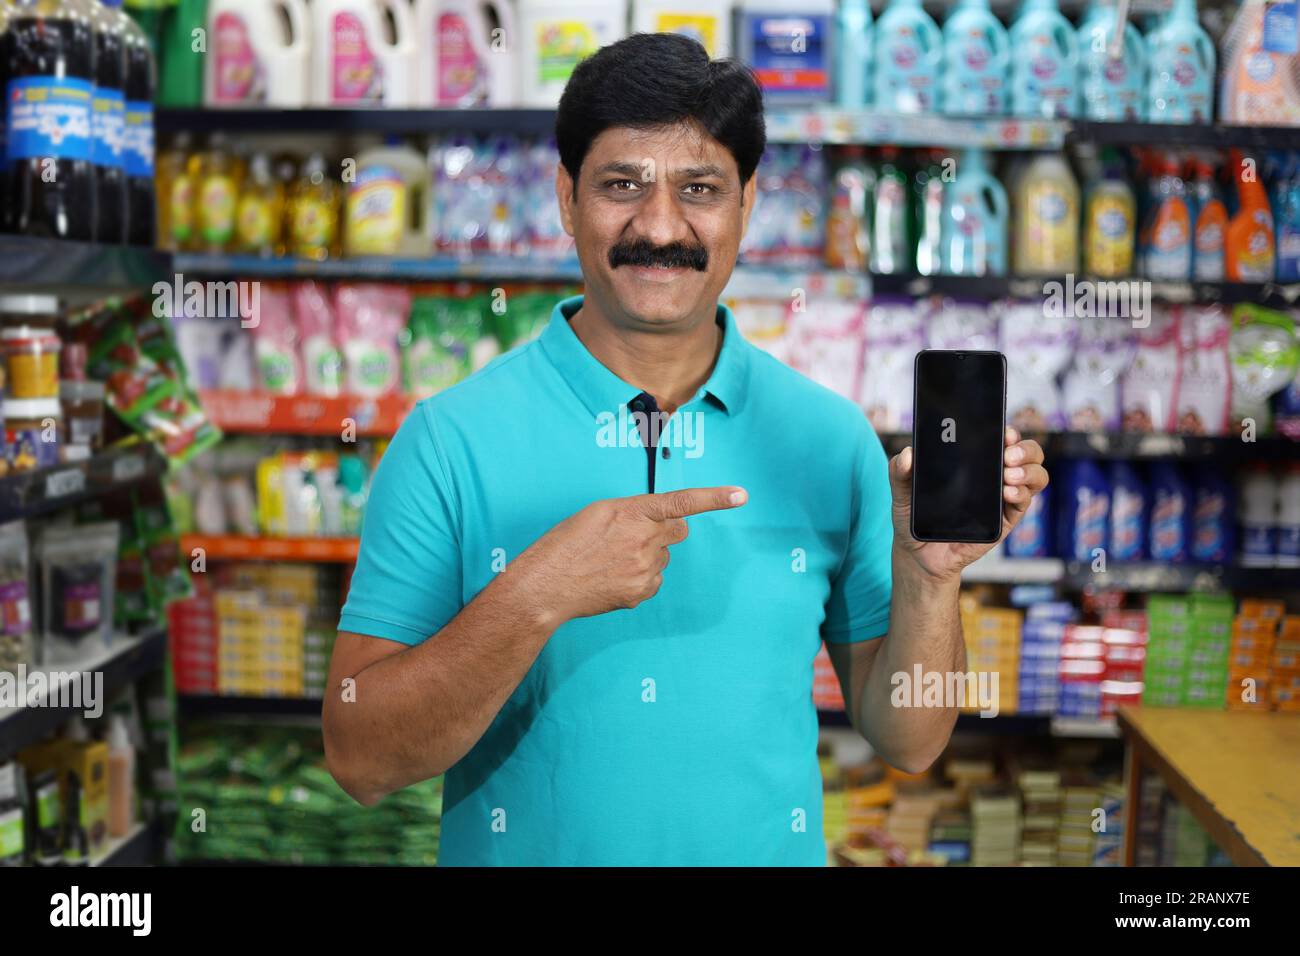 Smiling mid aged man purchasing in a grocery store pointing towards the mobile app. Buying grocery in supermarket pointing towards the mobile app. Stock Photo